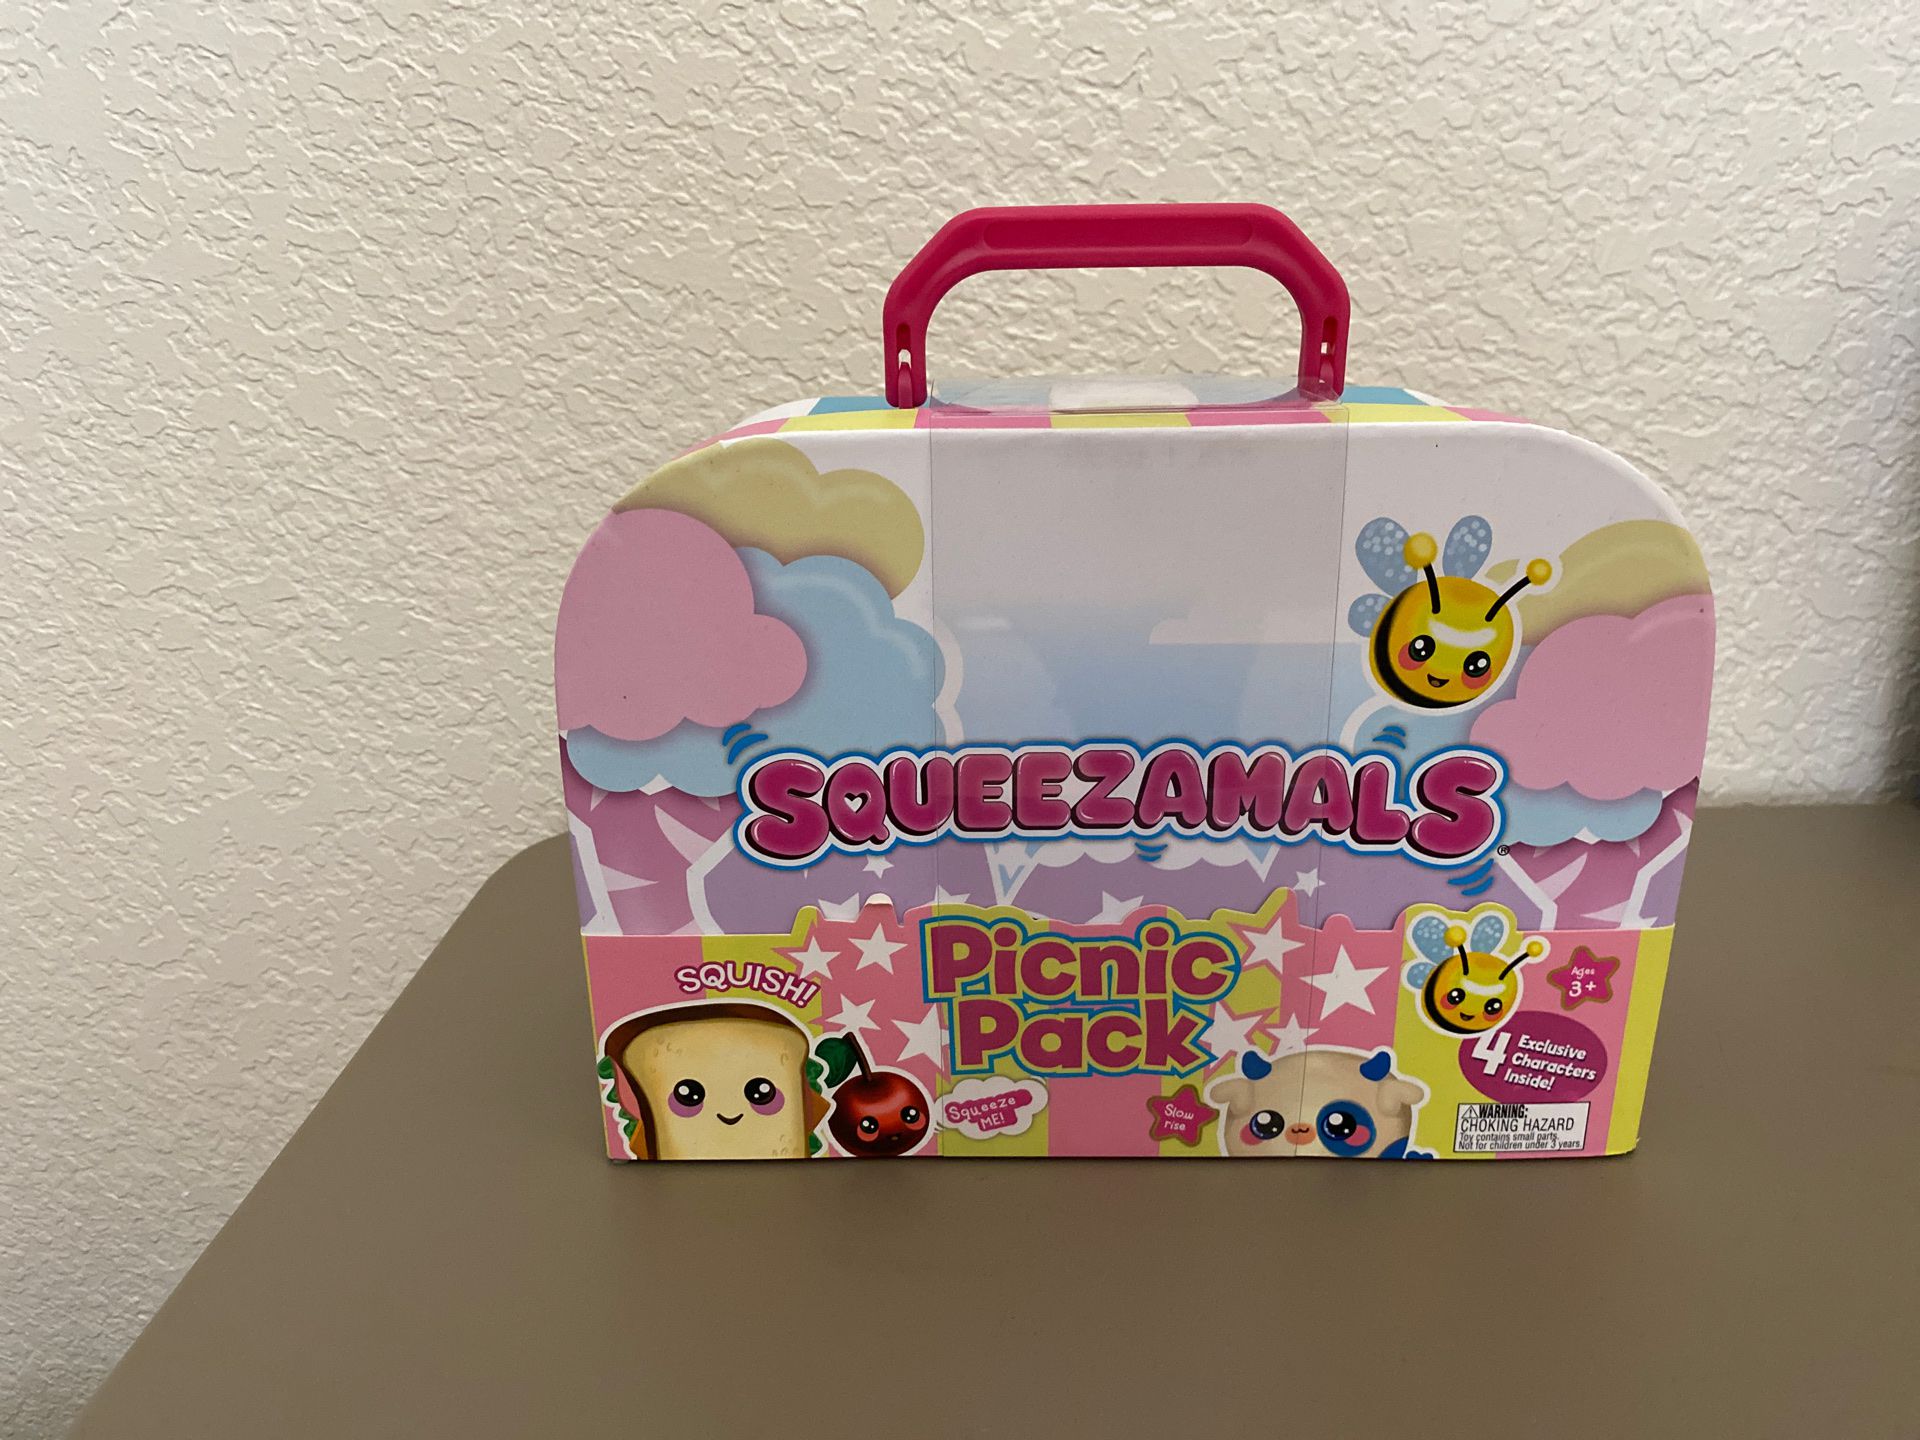 Squeezamals Picnic Pack New 10 available